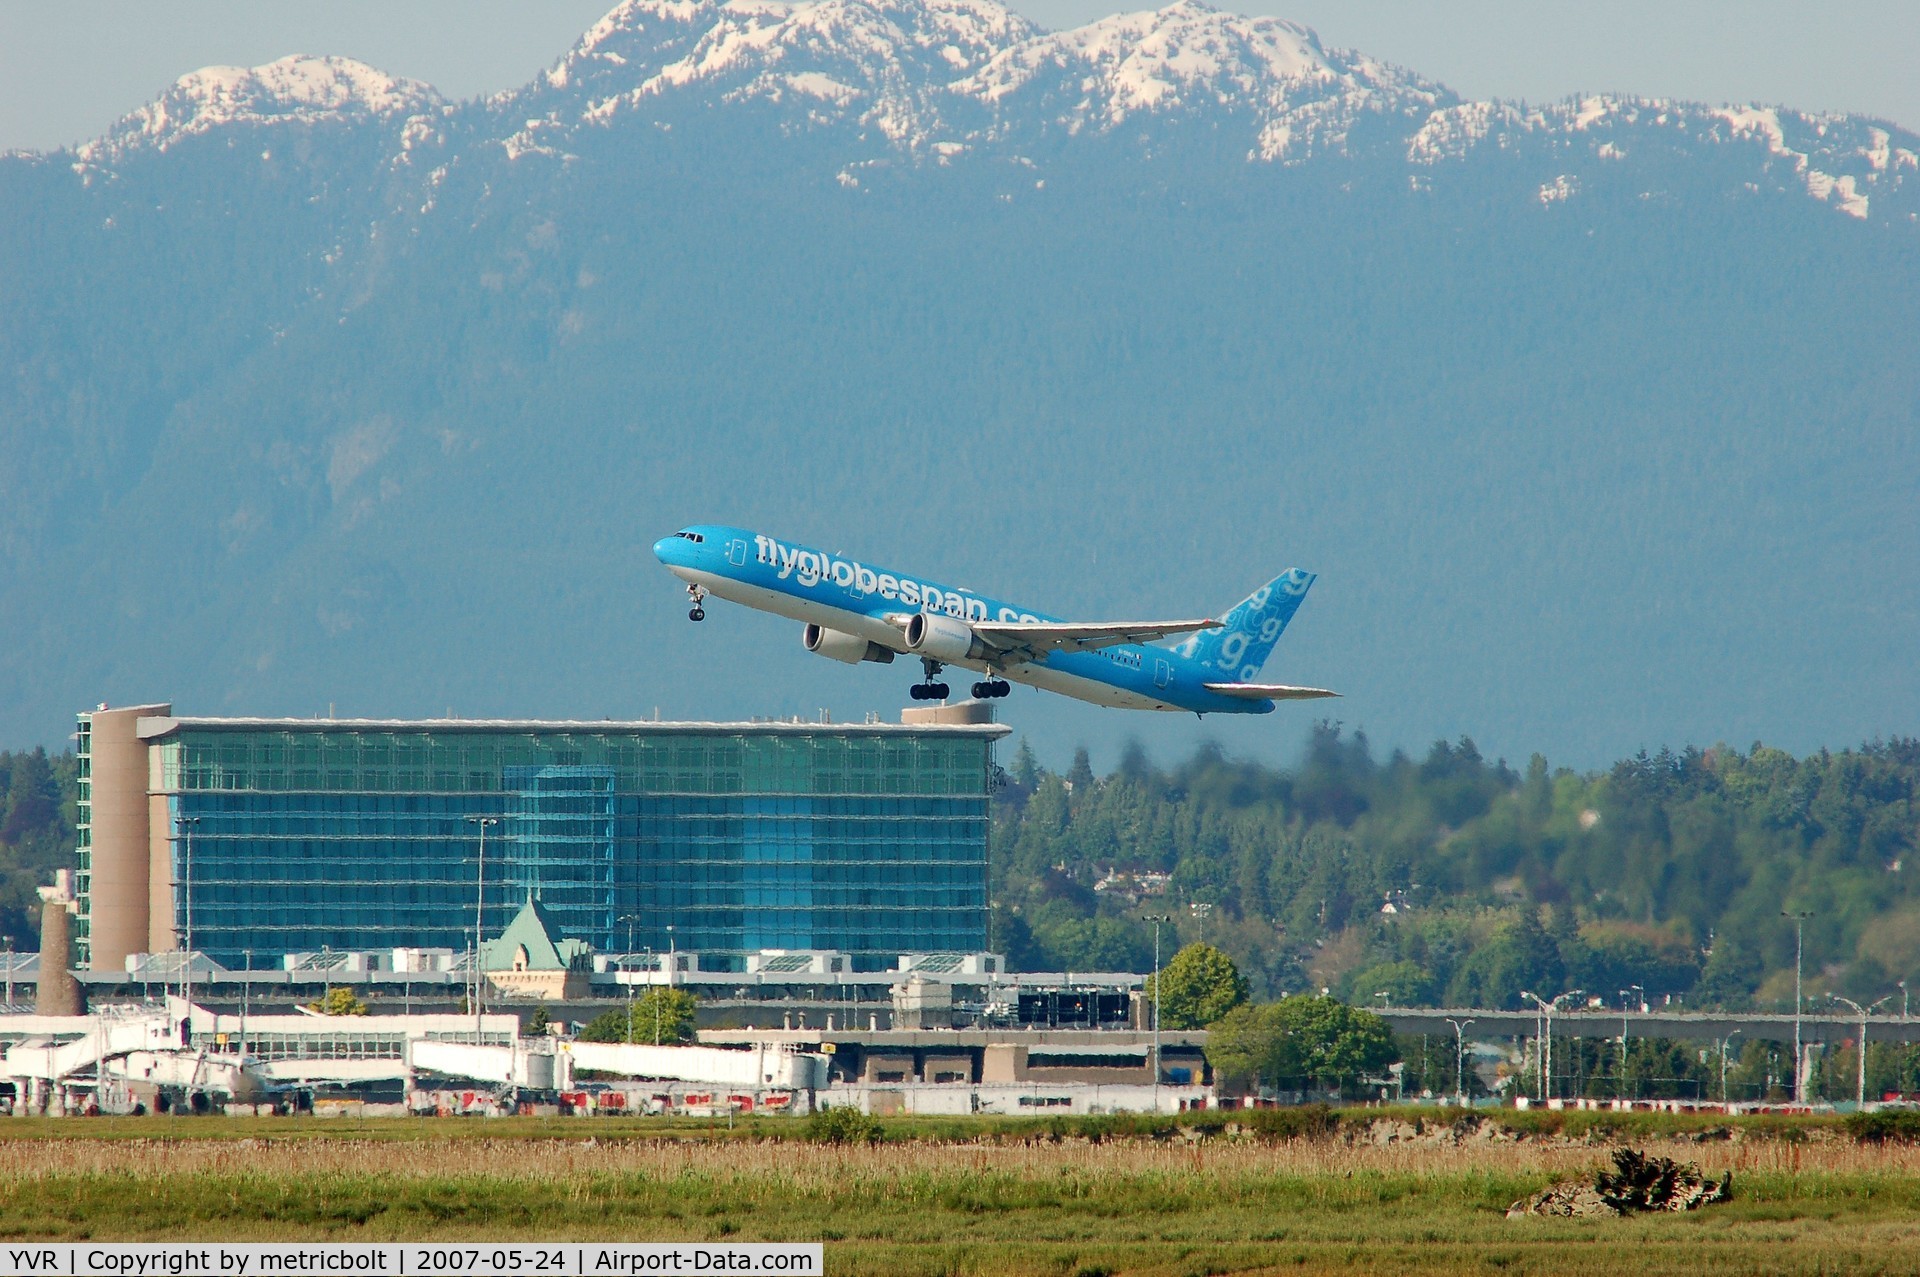 Vancouver International Airport, Vancouver, British Columbia Canada (YVR) - departure for Glasgow